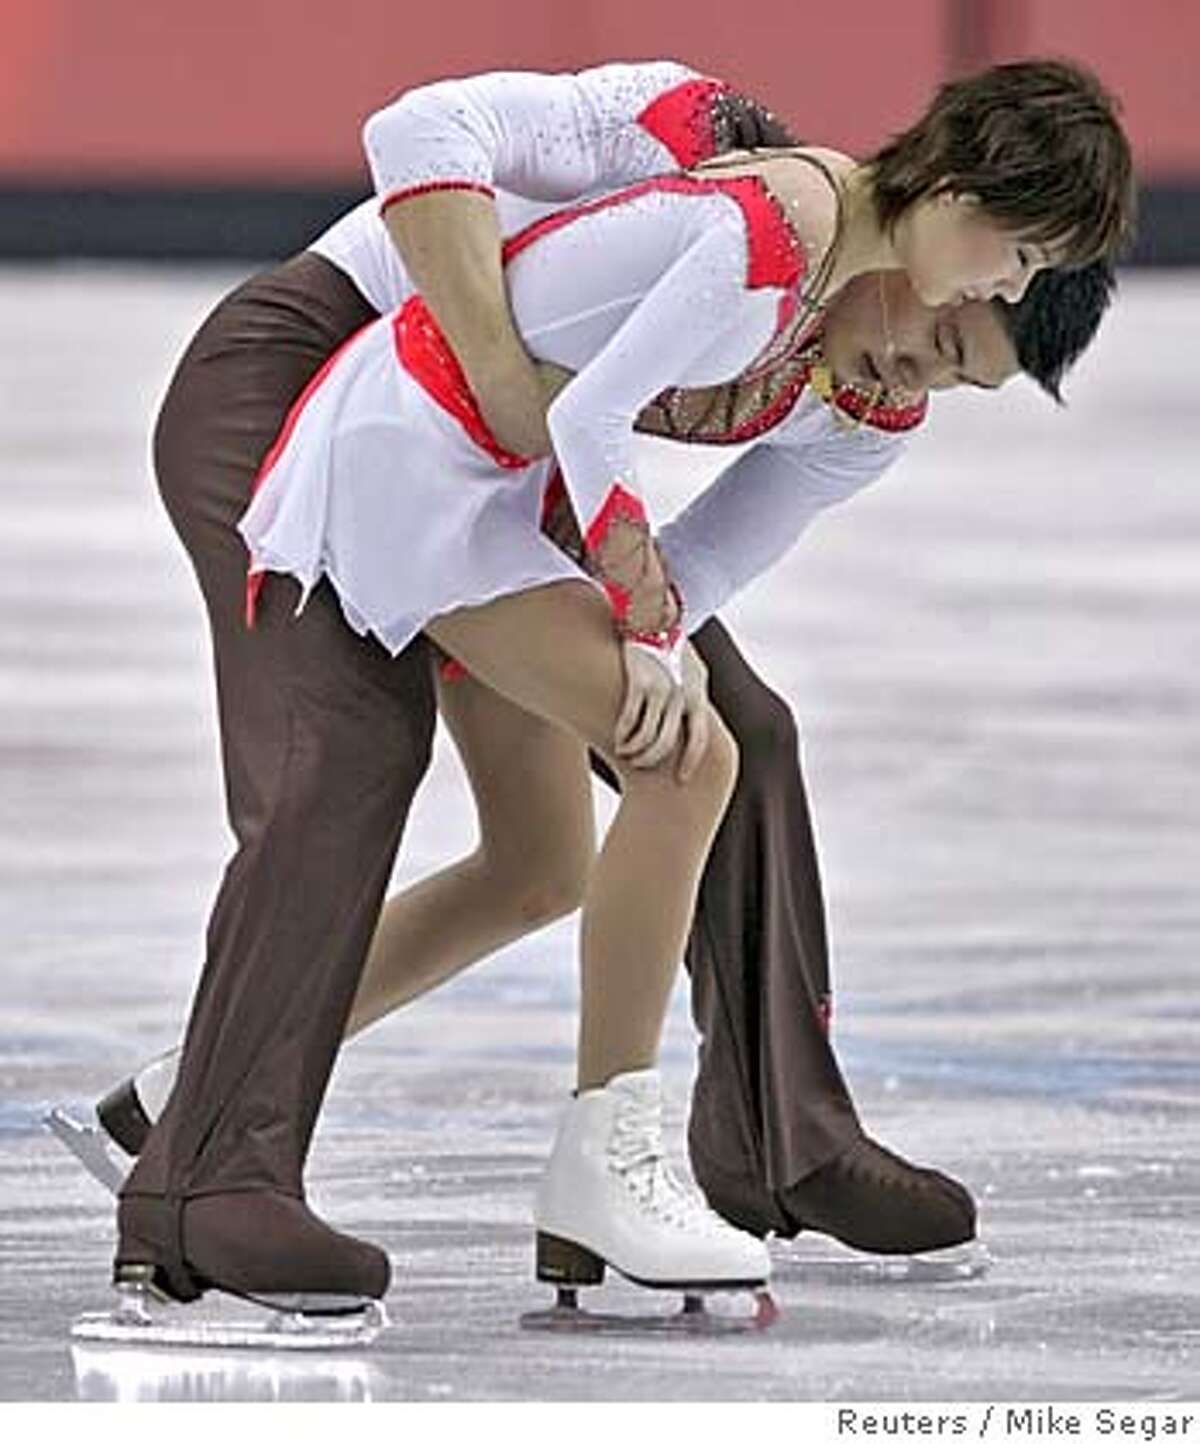 Zhang Dan hugs Zhang Hao from China after winning the silver medal in the figure skating Pairs Free Skating at the Torino 2006 Winter Olympic Games in Turin, Italy February 13, 2006. REUTERS/Mike Segar 0